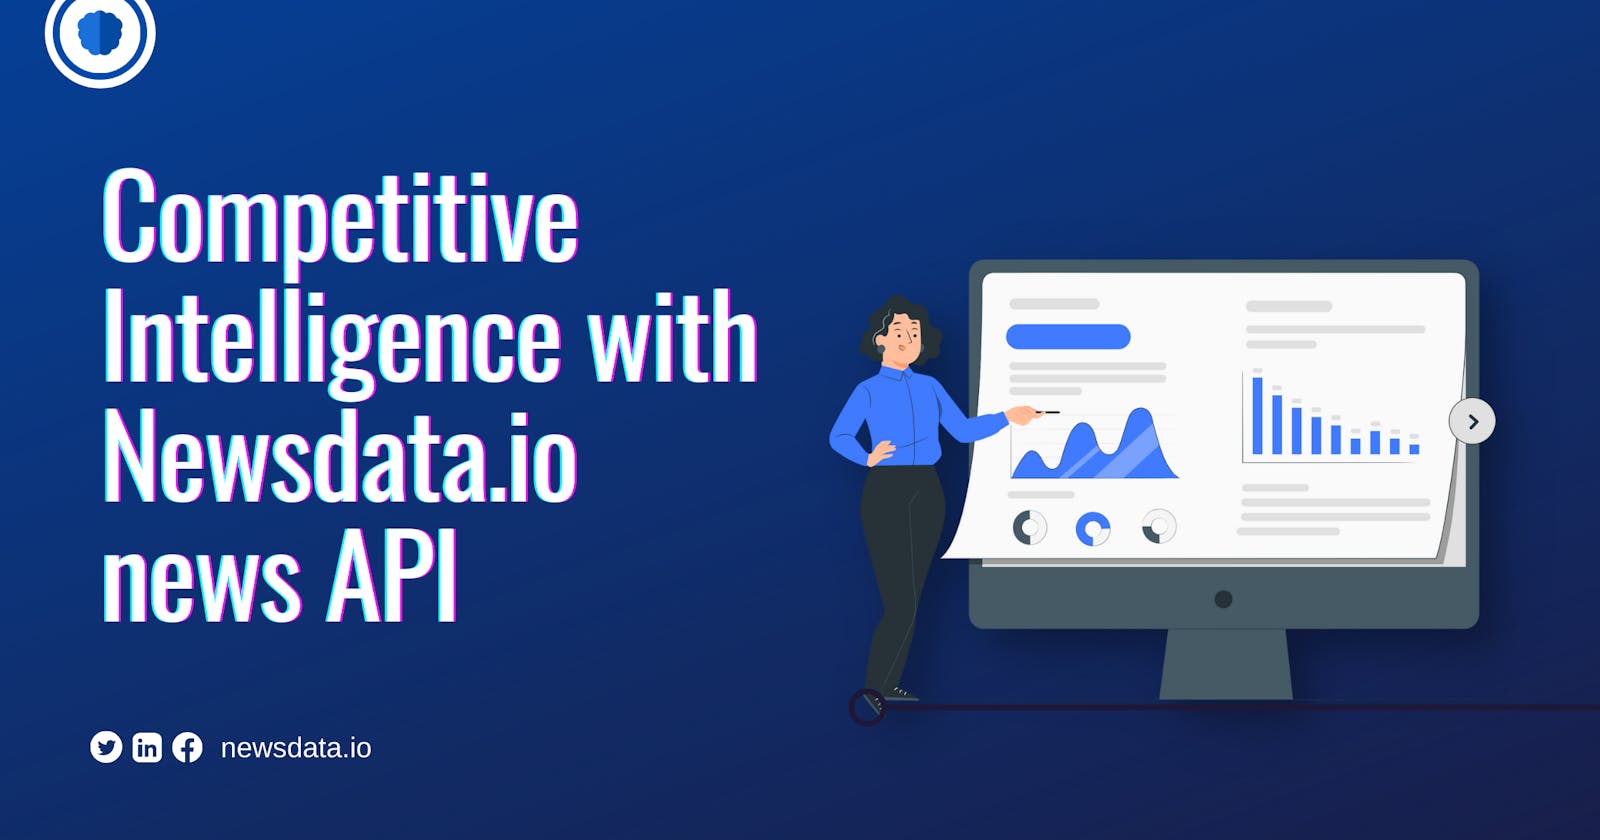 How to Use the Newsdata.io News API to Boost Competitive Intelligence